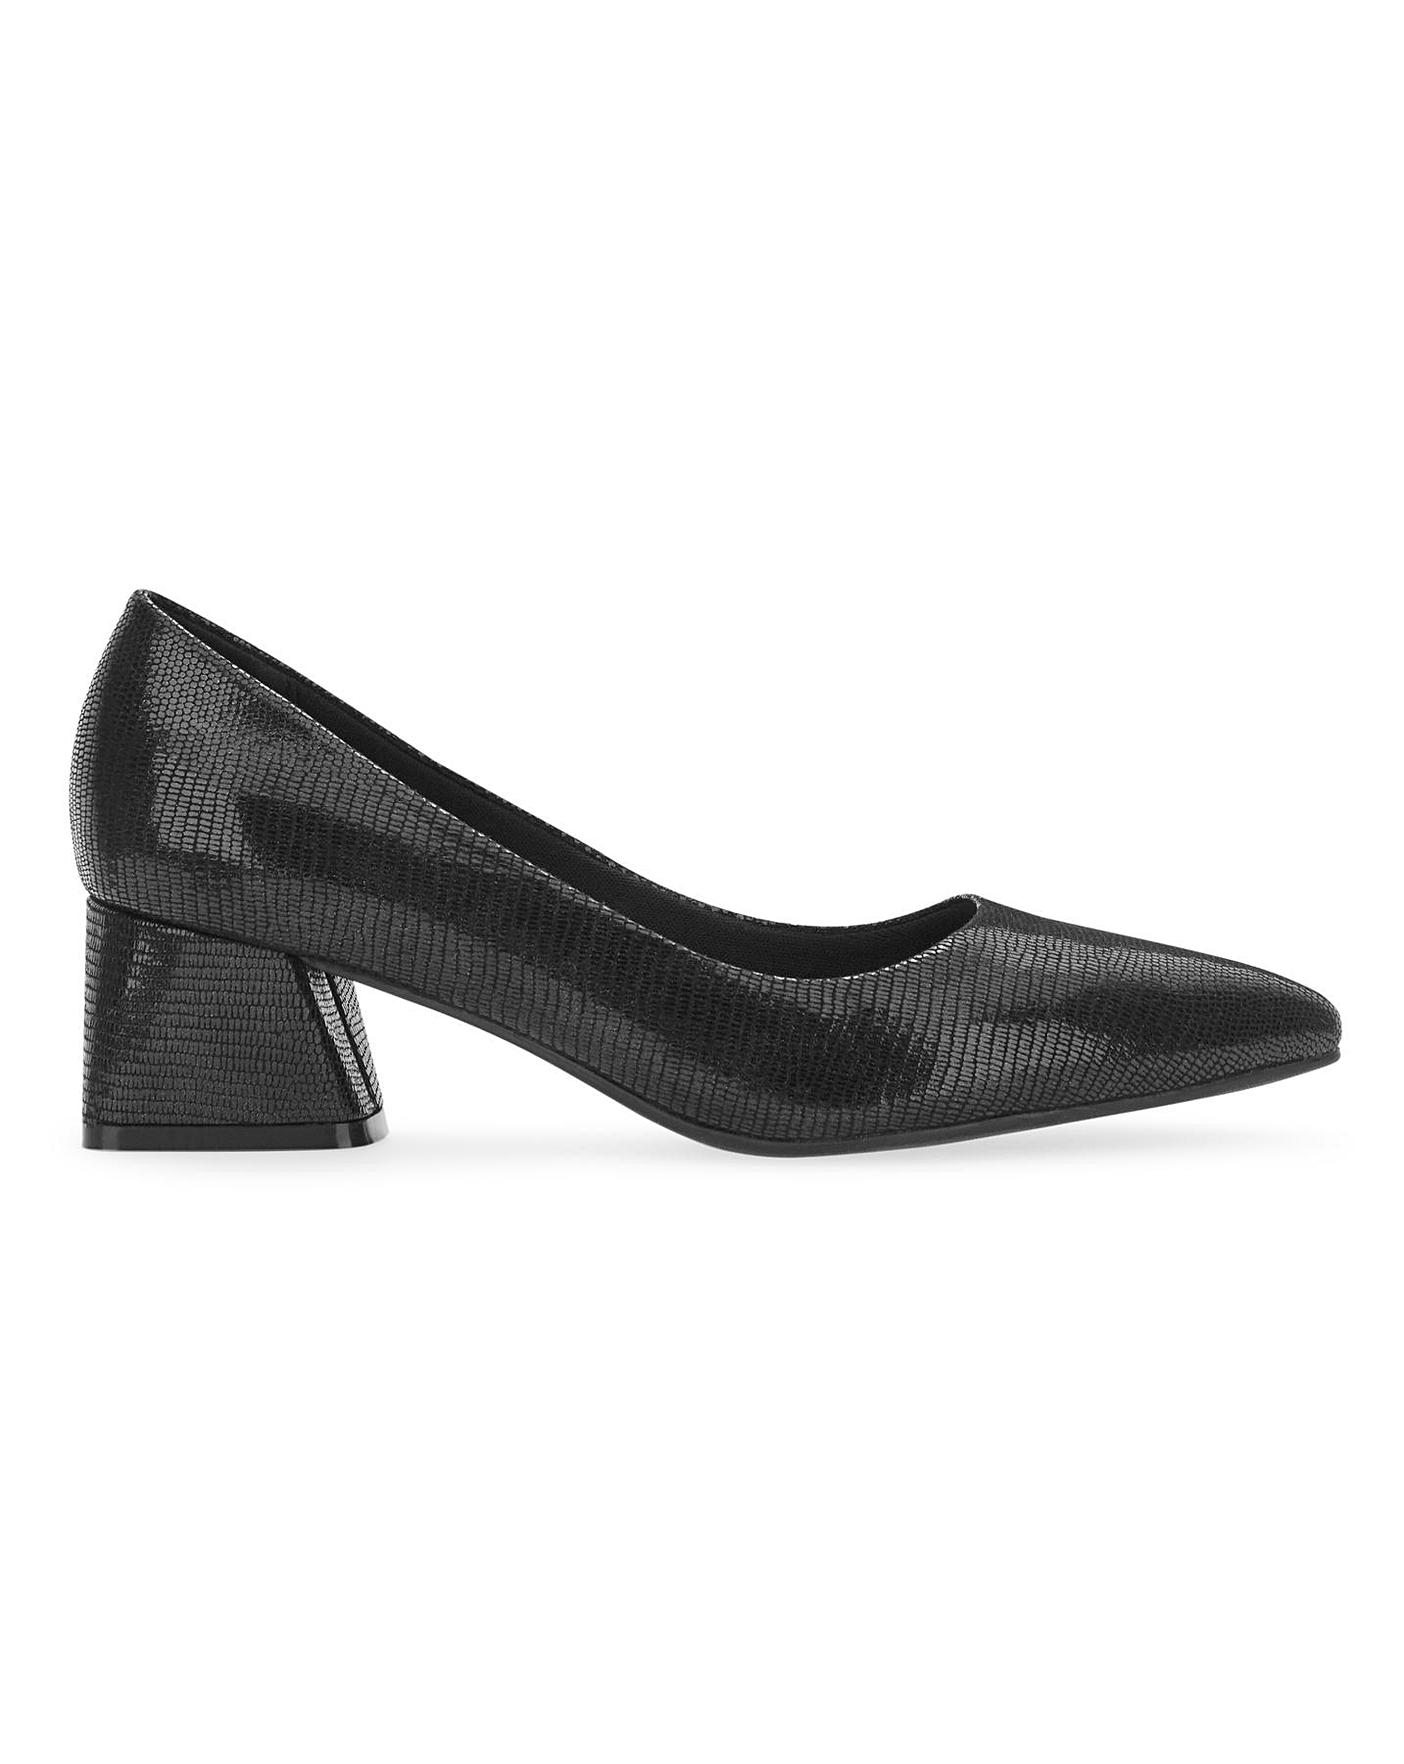 Calla | Ava | Black Leather | Kitten heeled dress shoes for bunions